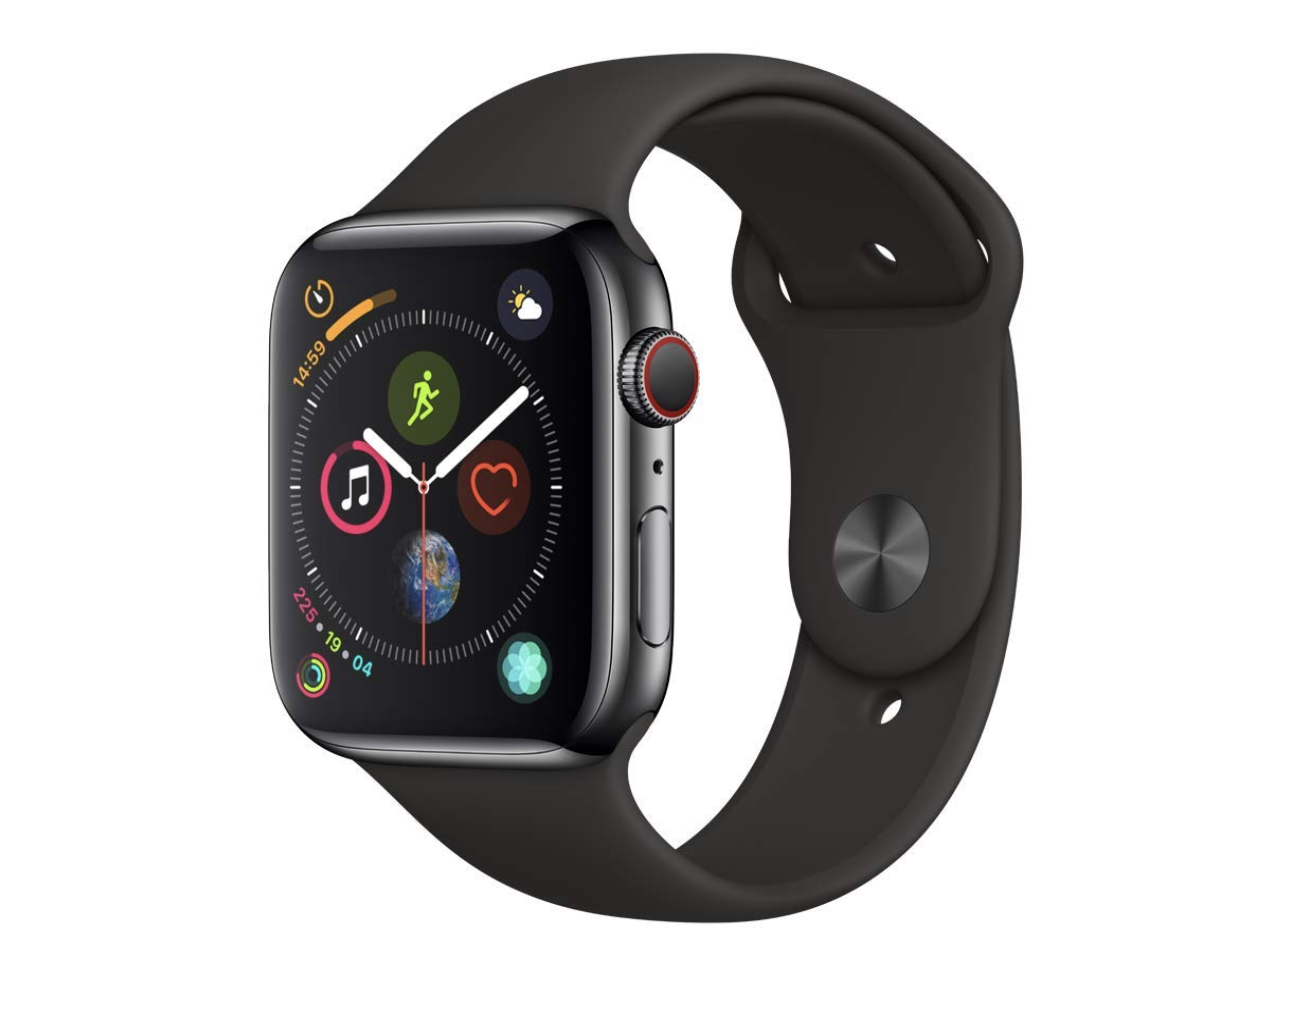 Apple Watch Series 4 (GPS + Cellular, 44mm) - Space Black Stainless Steel Case with Black Sport Band